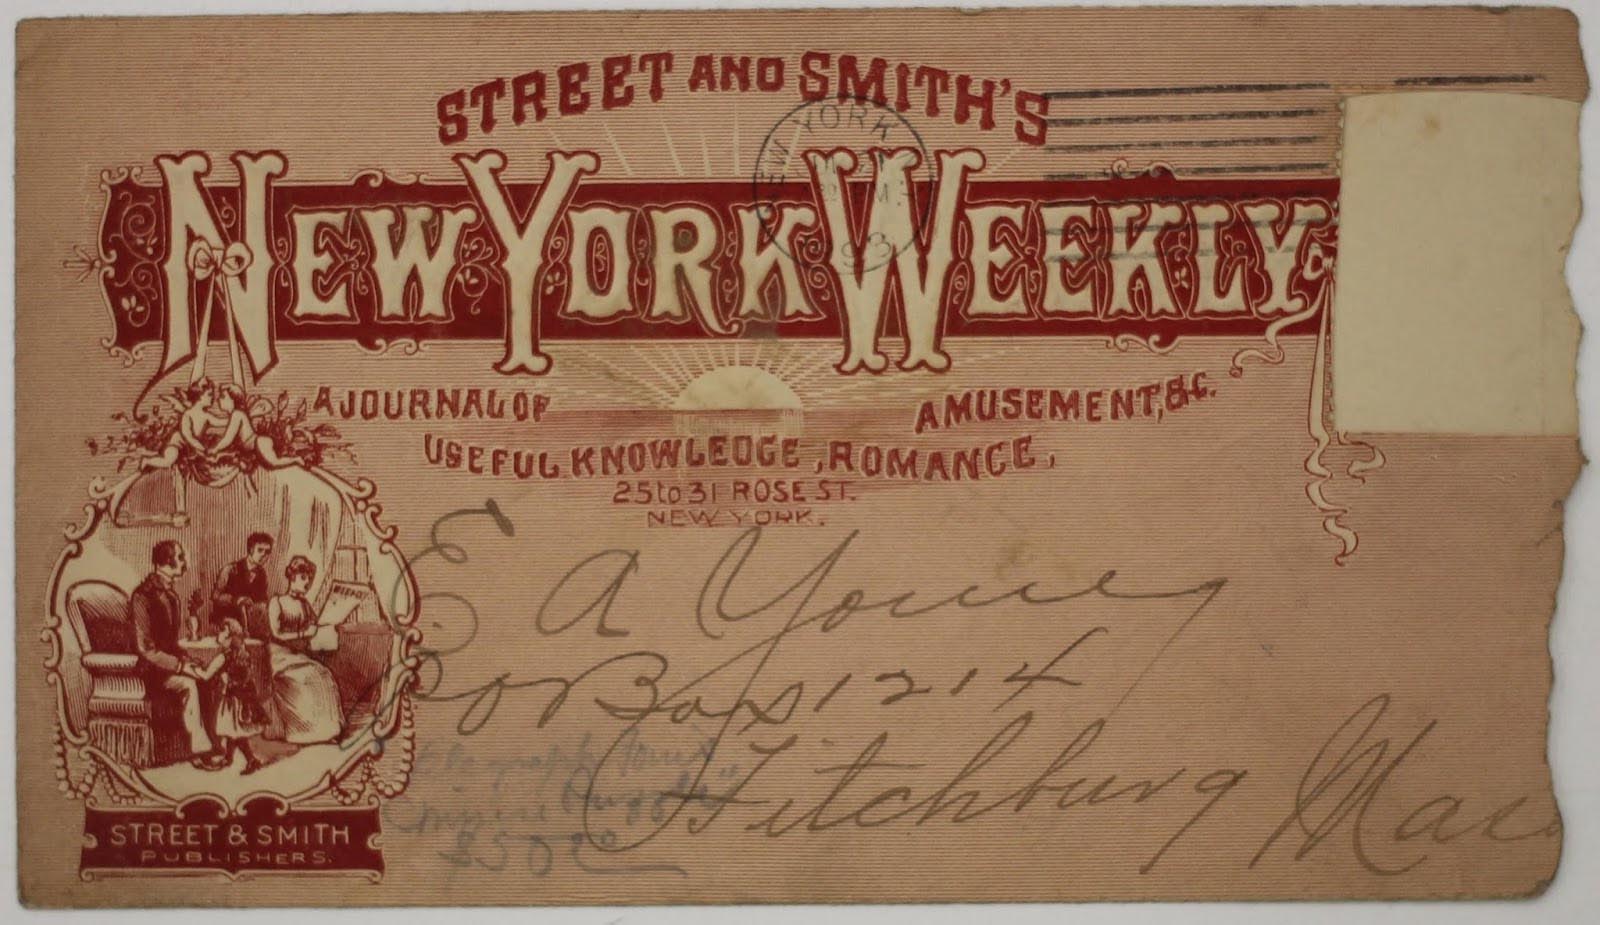 Historic envelope with New York Weekly logo and byline. Text reads: Street and Smith's New York Weekly. A Journal of amusements, useful knowledge, romance.  An engraving to the left of 2 men and a woman in a parlor.  The envelope is addressed in handwriting to: E. A. Young, PO Box 1214, Firchburg, Mass.